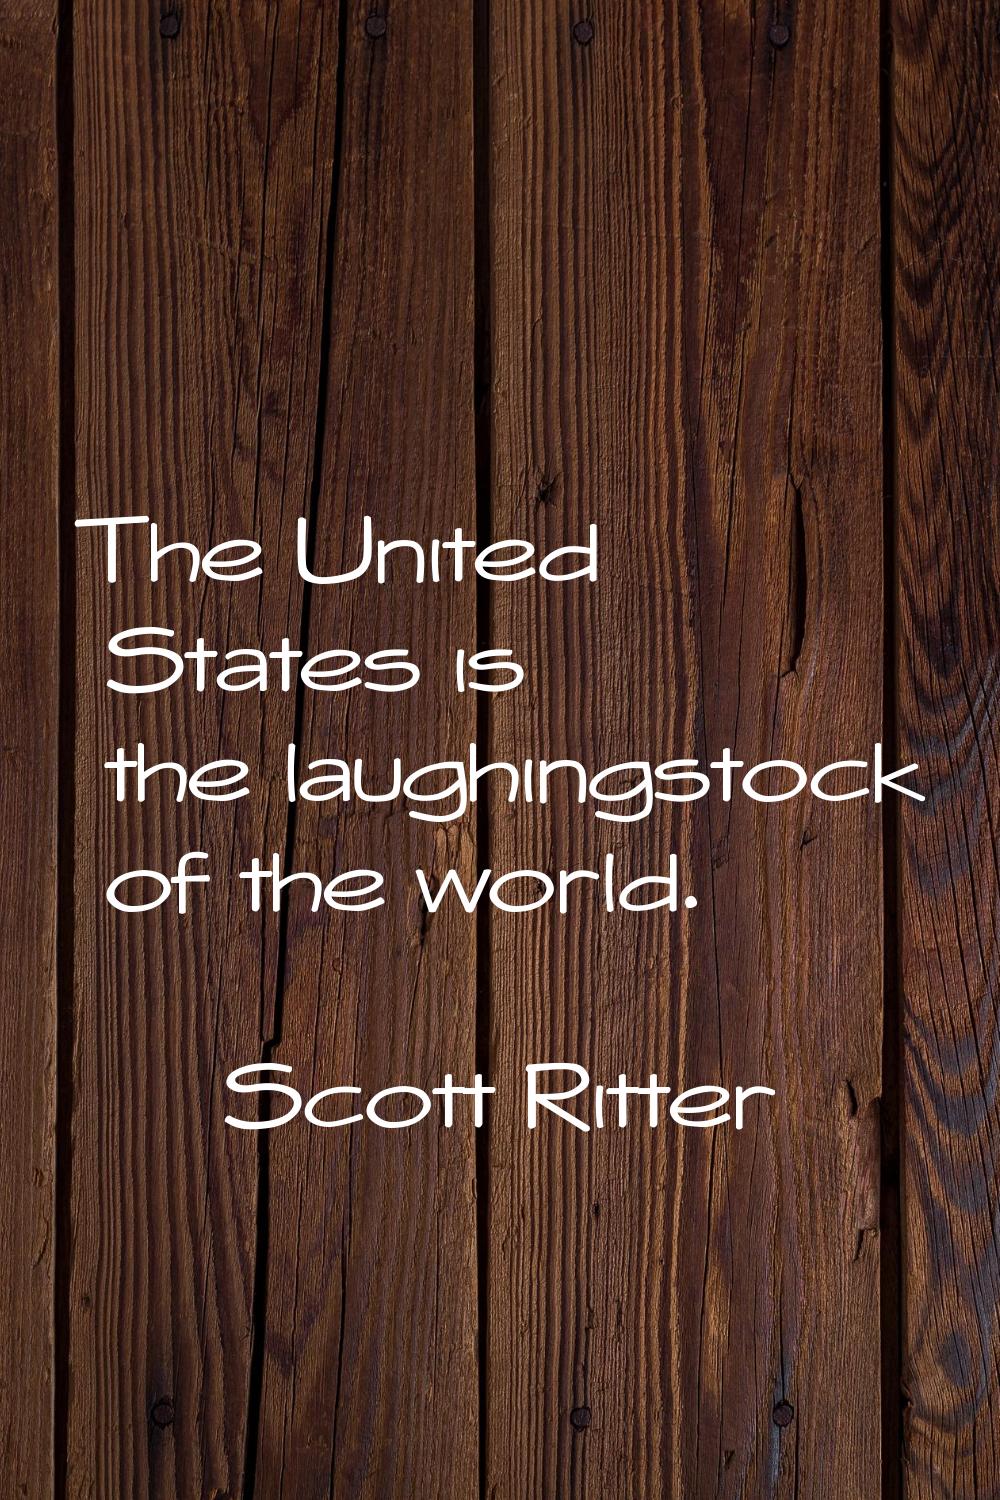 The United States is the laughingstock of the world.